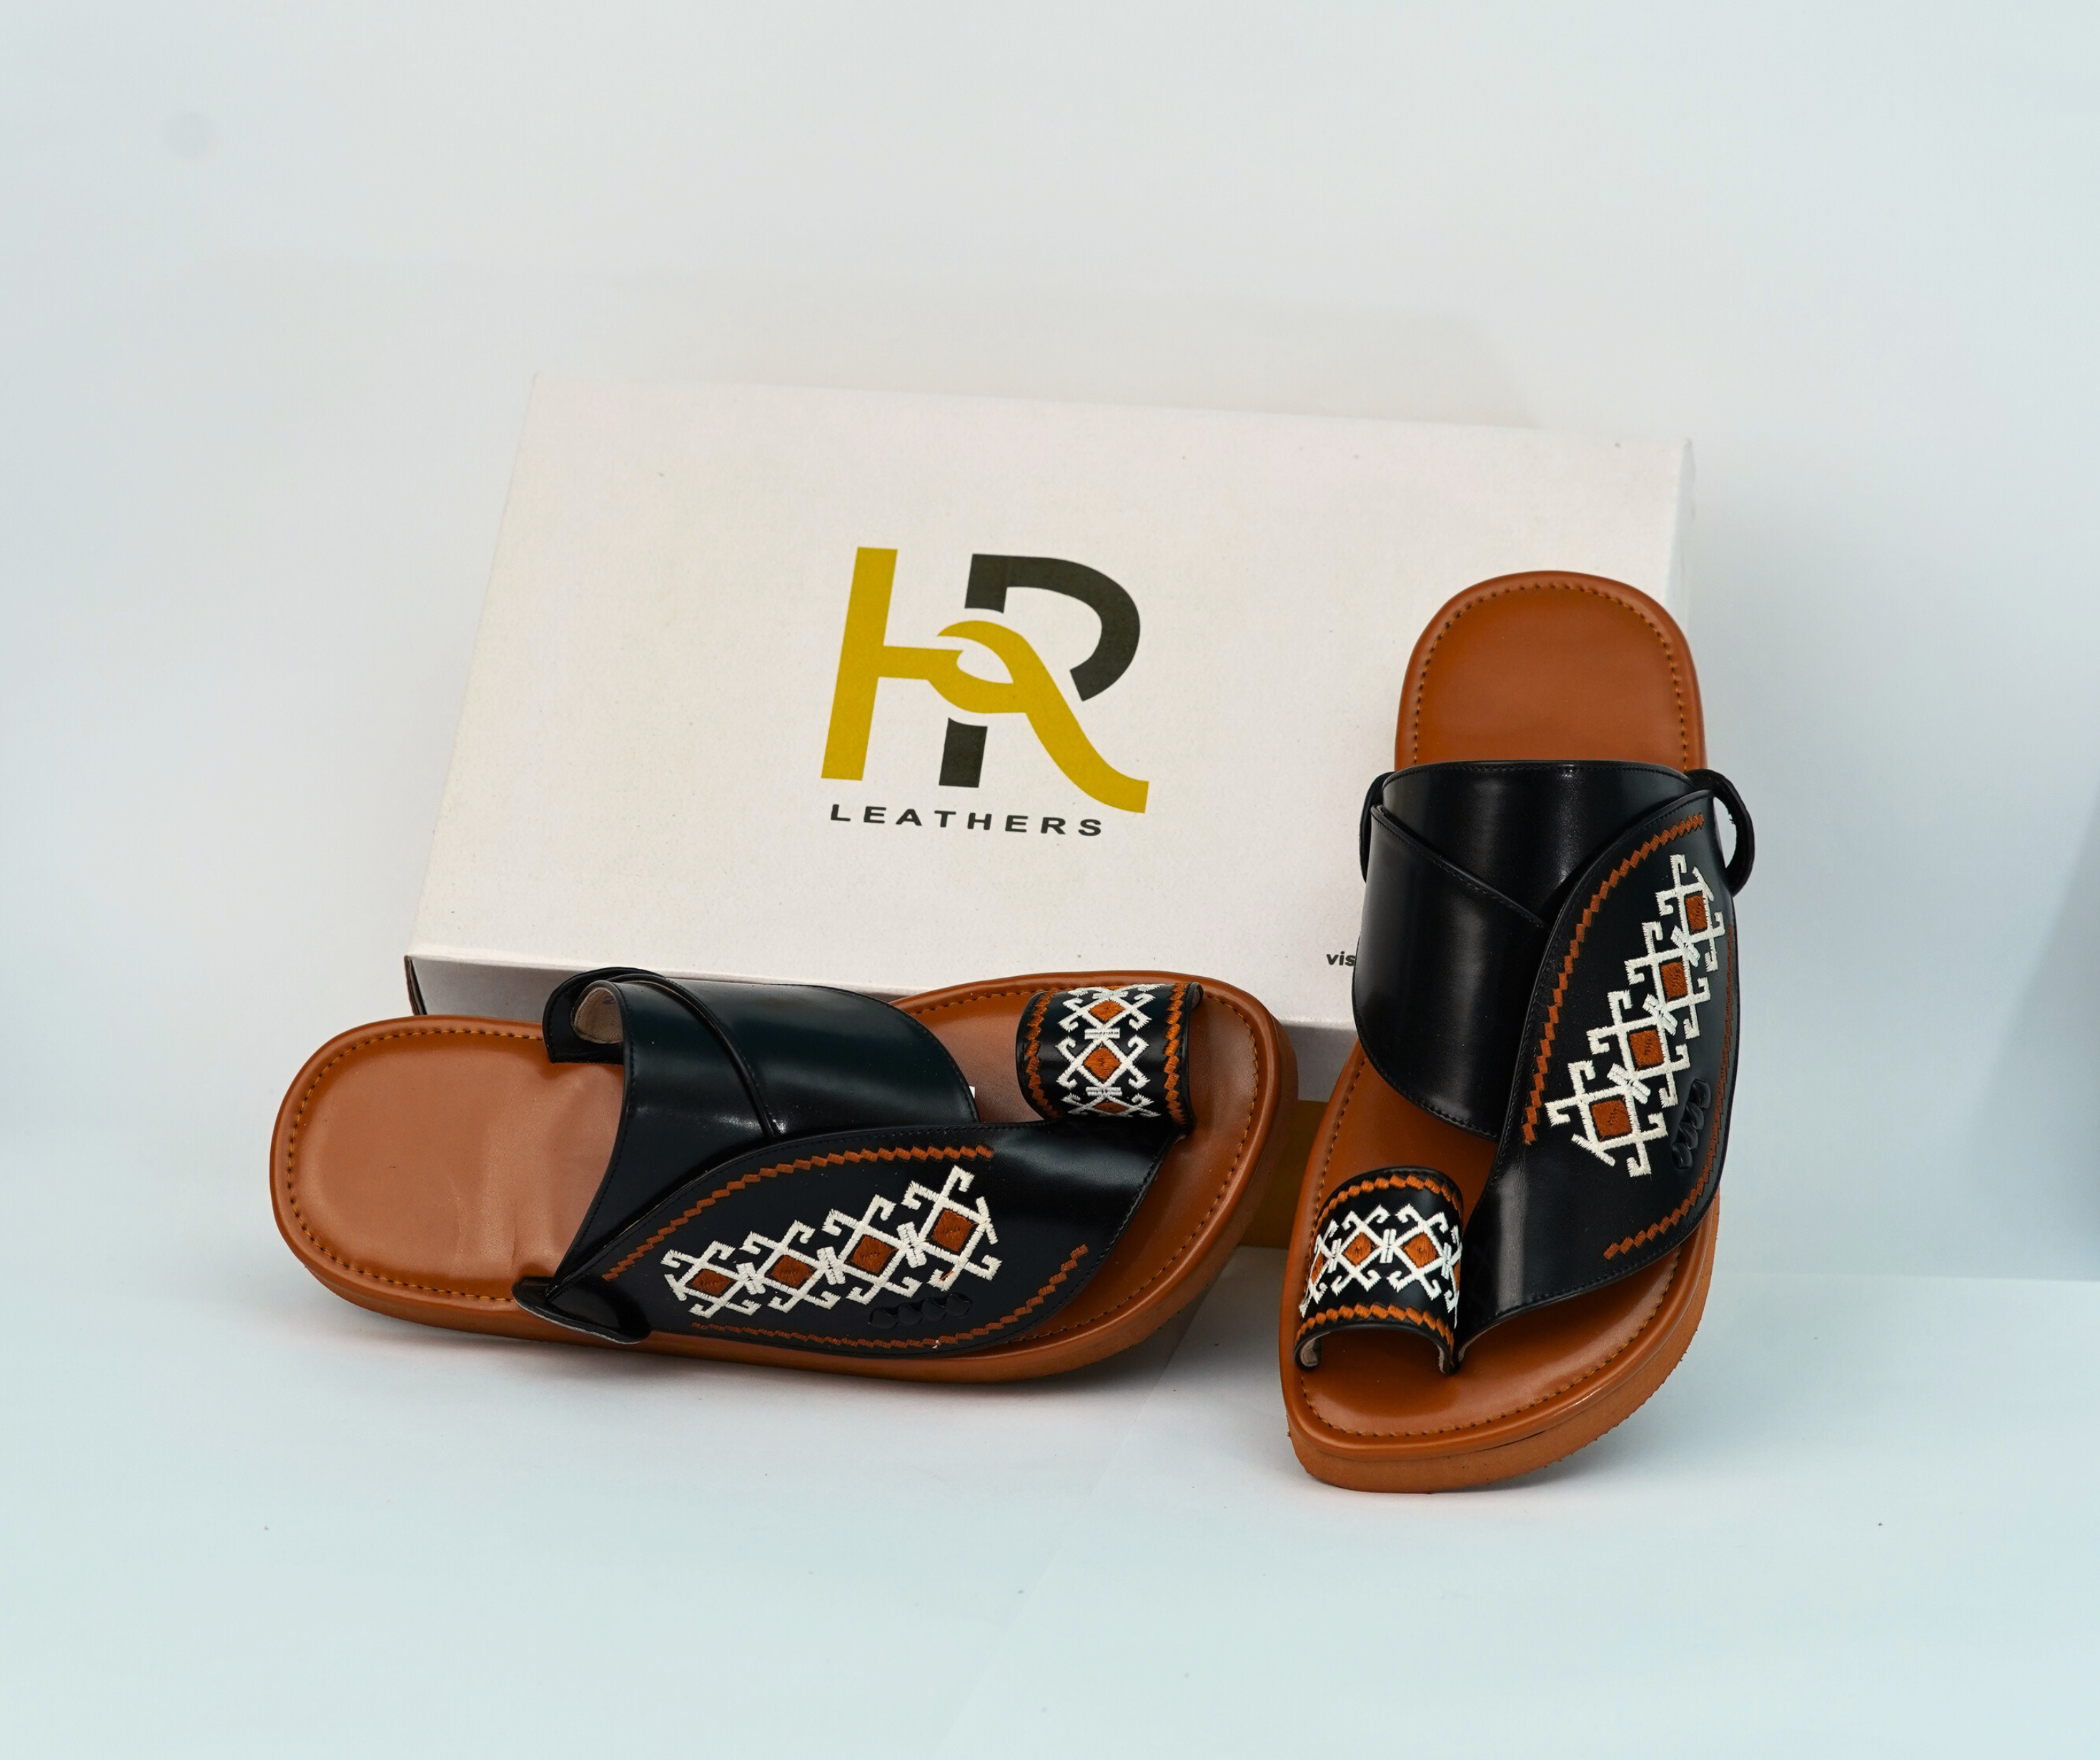 Arabic Khaliji Sandals in Brown Colour with iconic Embroidery